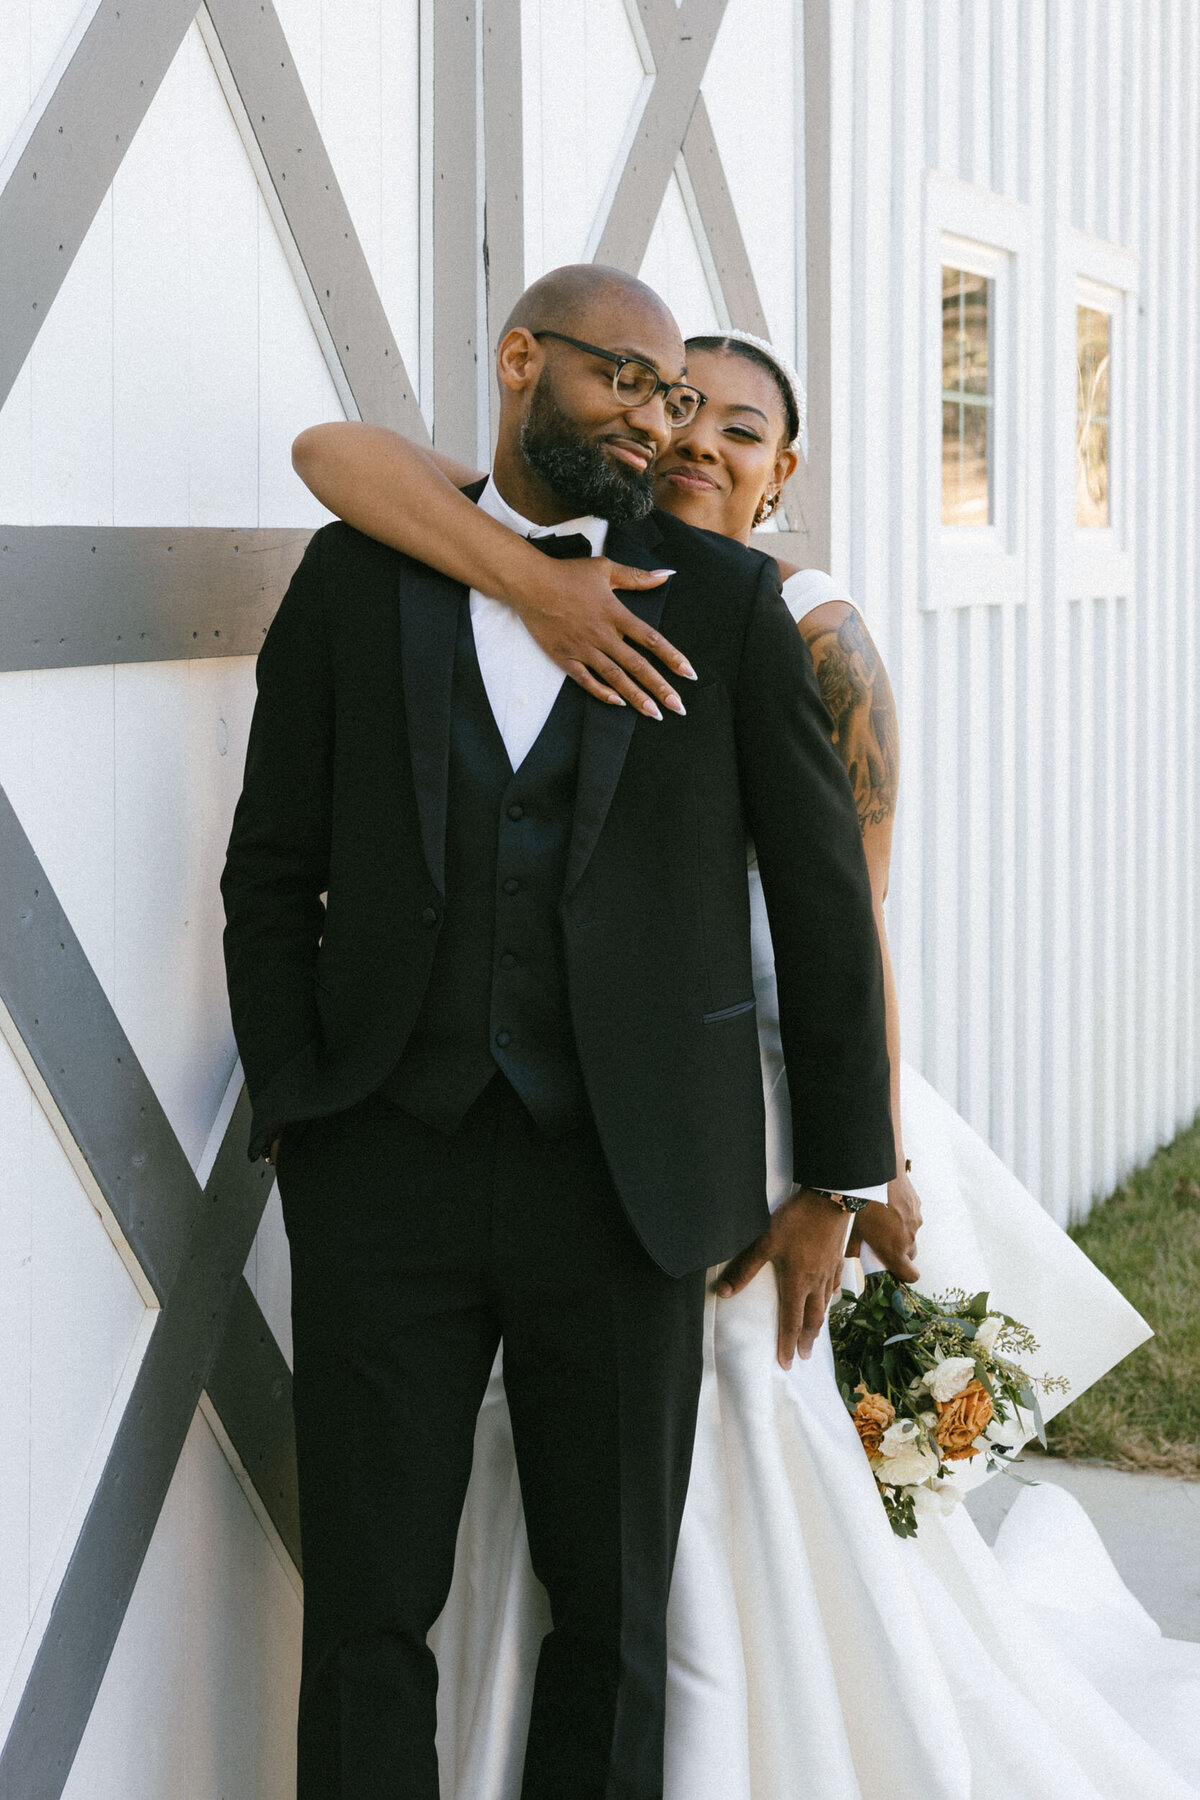 A couple embraces in front of a white barn at an outdoor elopement.